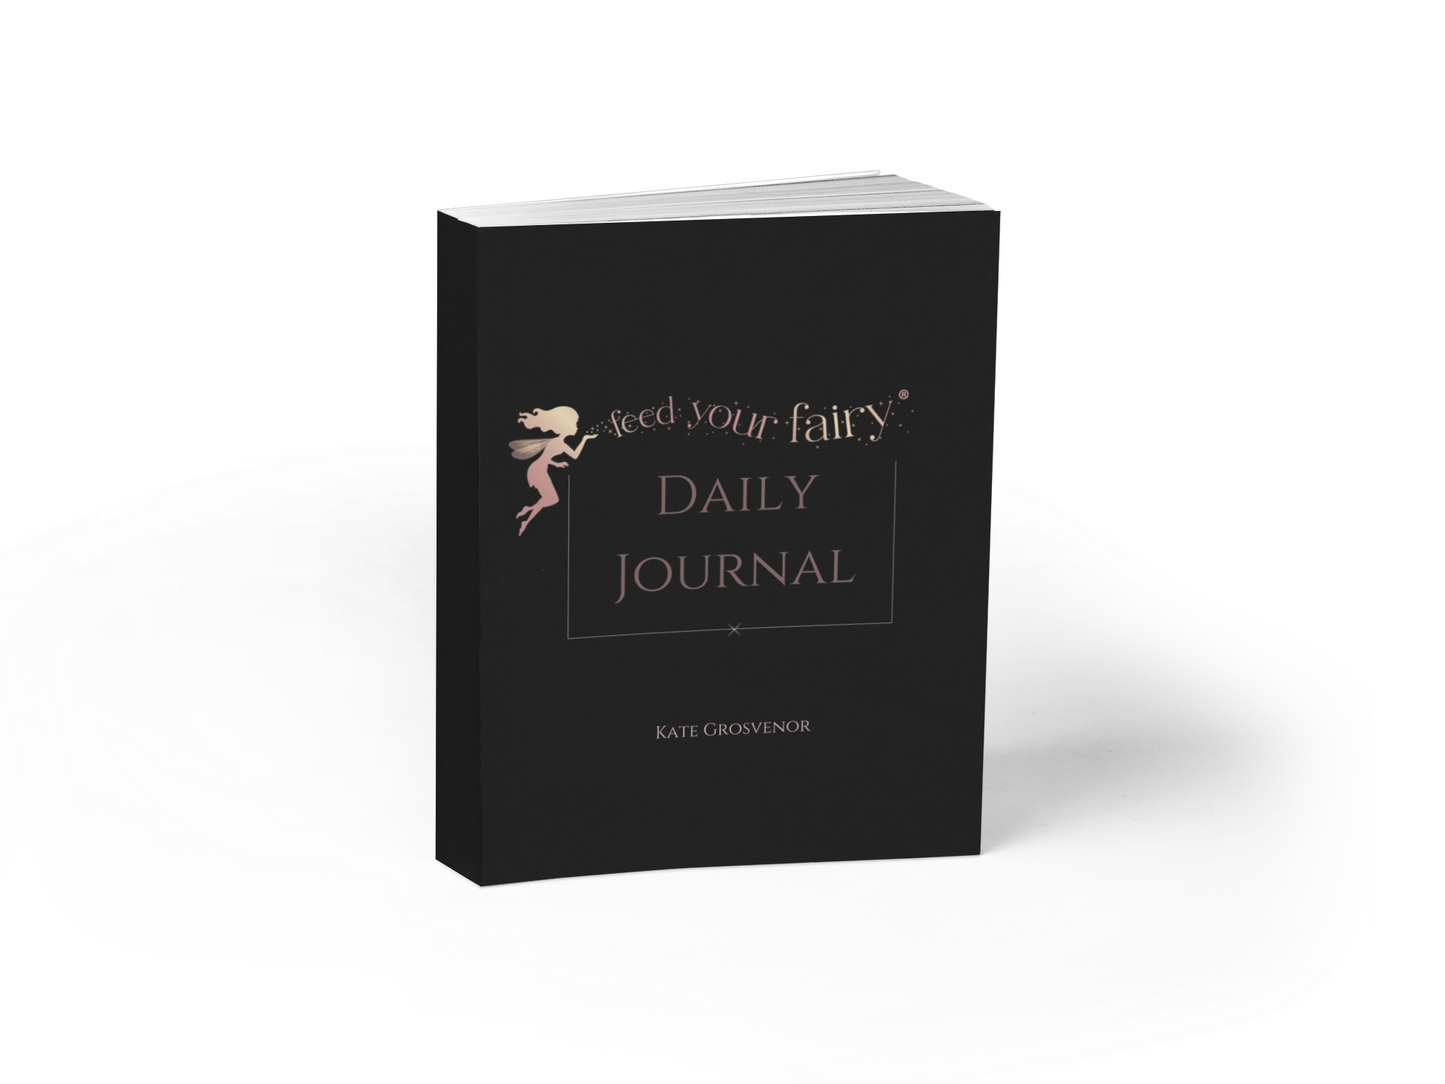 Feed your Fairy Daily Journal